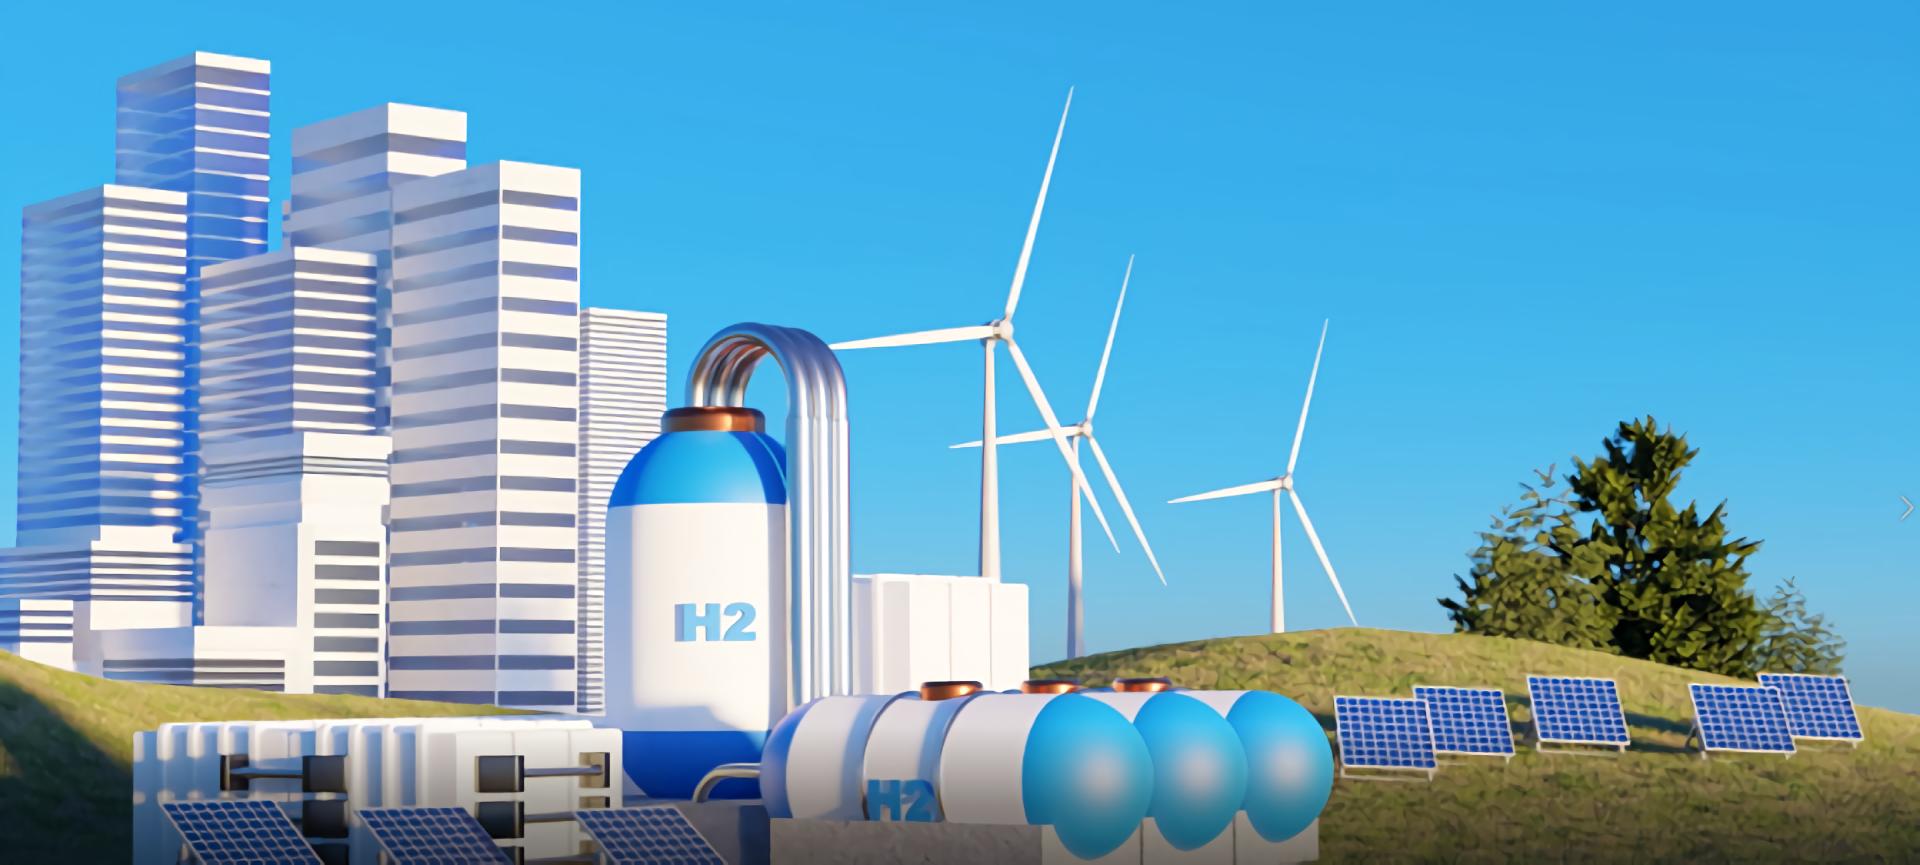 Energy Customer Markets Are Key to Scaling Clean Hydrogen